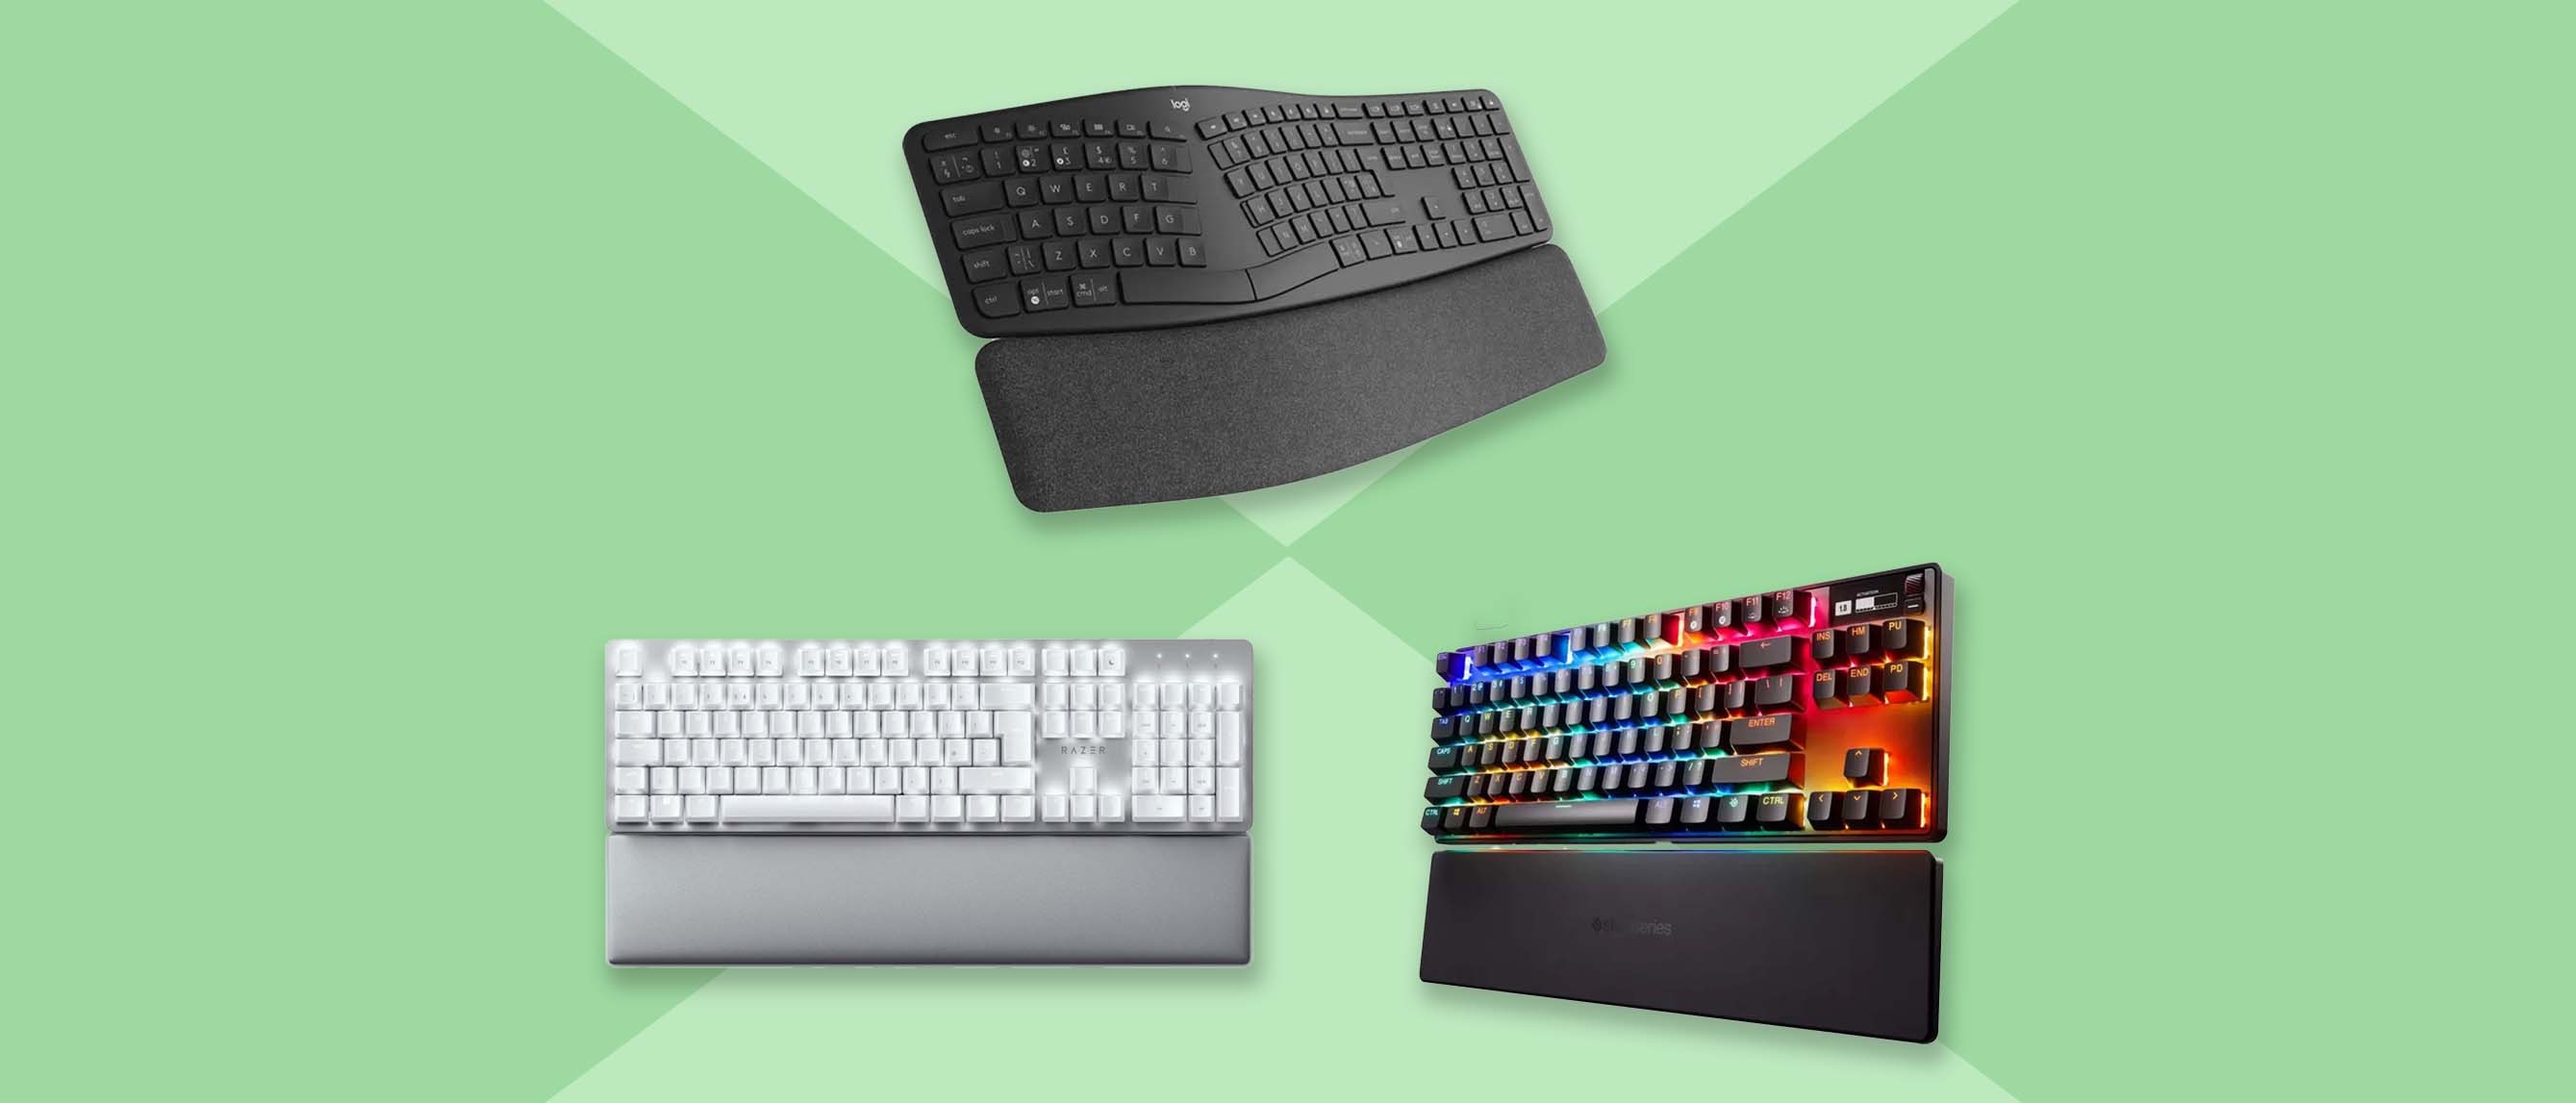 7 Bluetooth keyboards best for flexible work, gaming and more